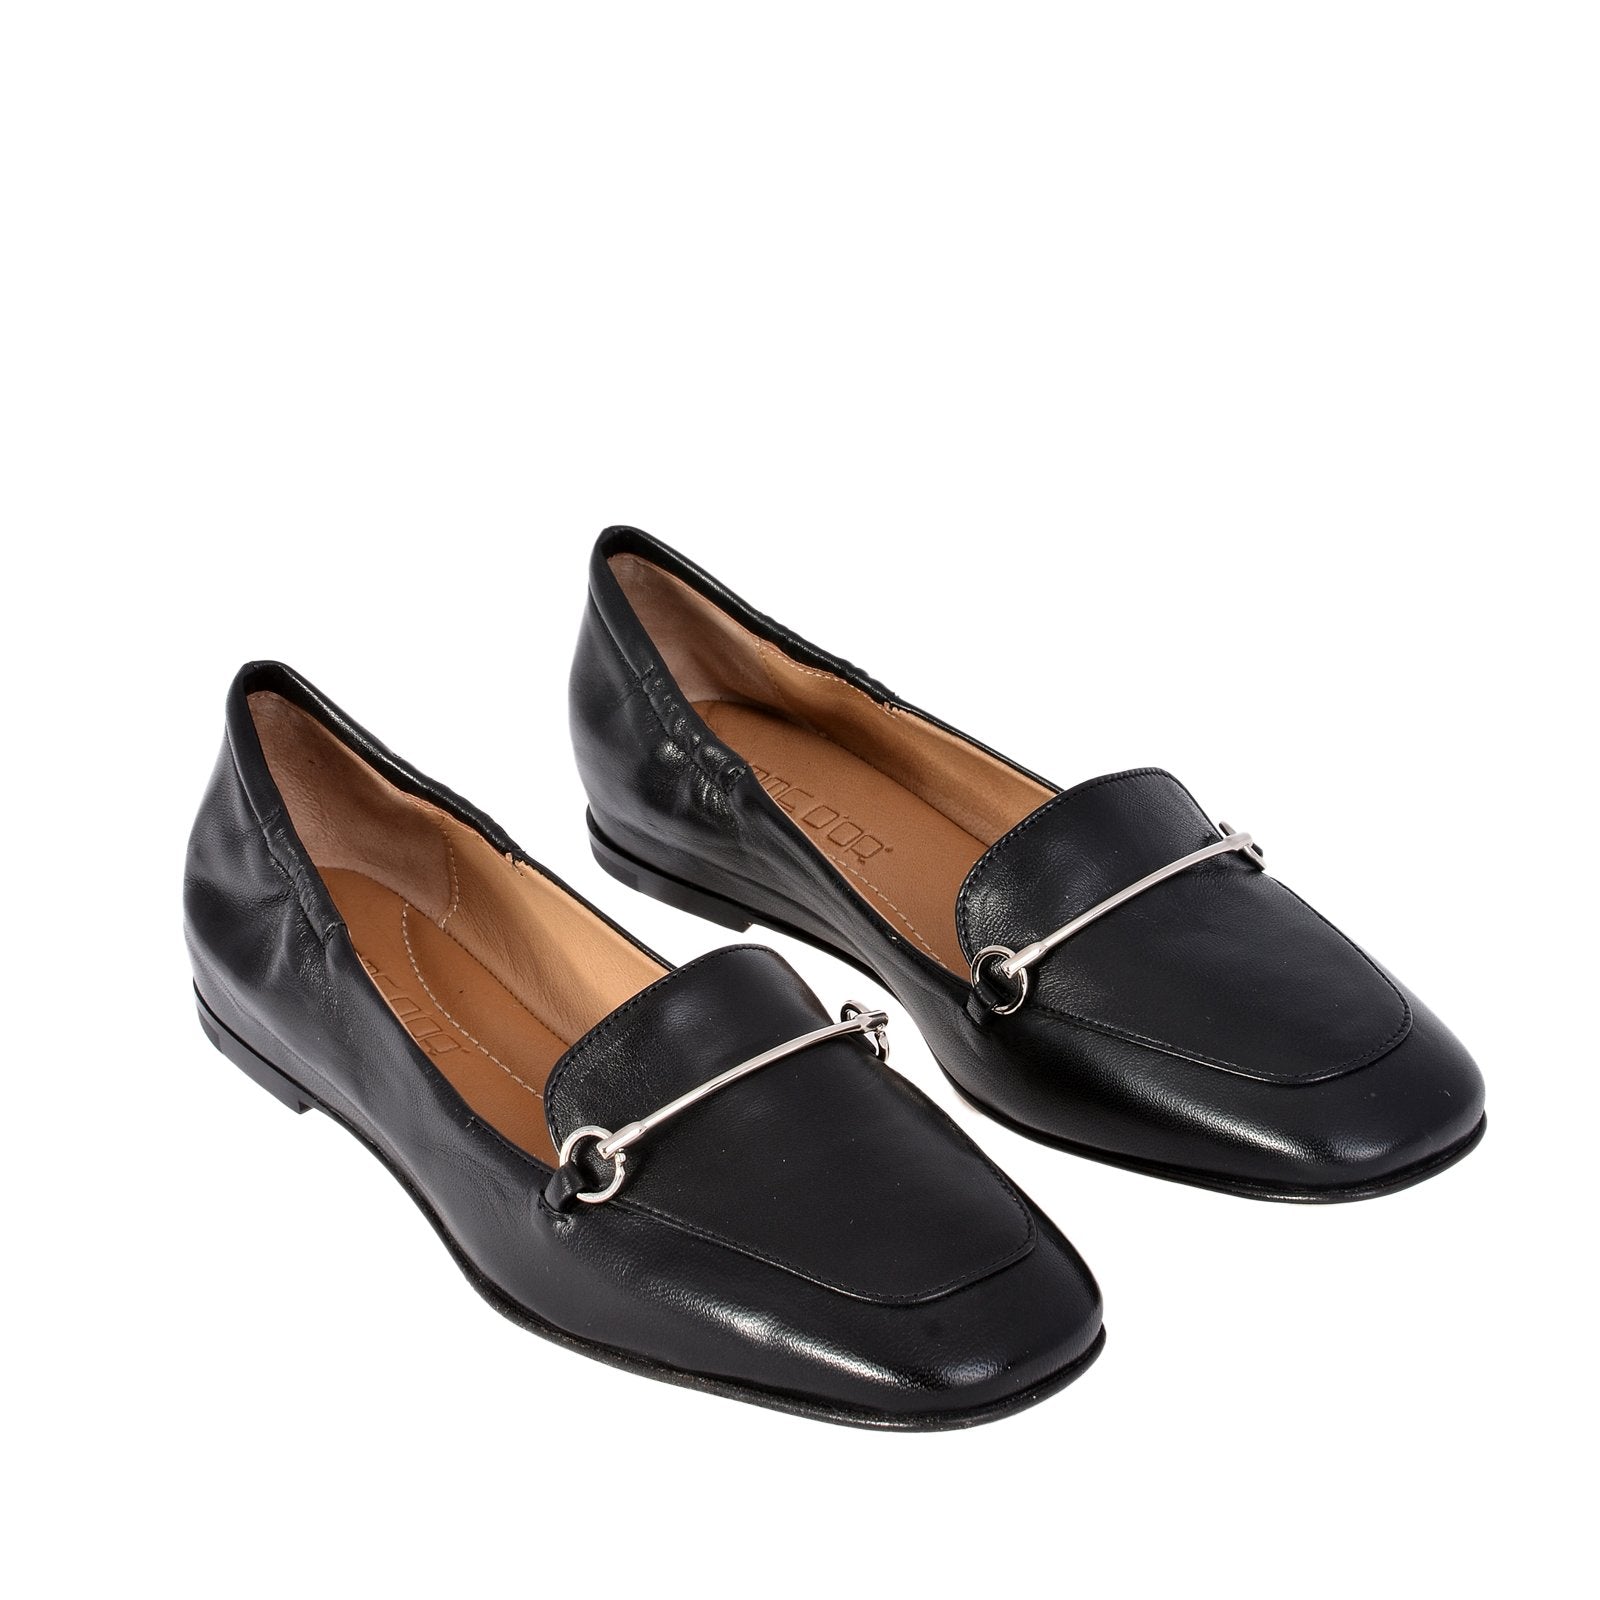 Lena Black Leather Loafers Flats 1144A - 2